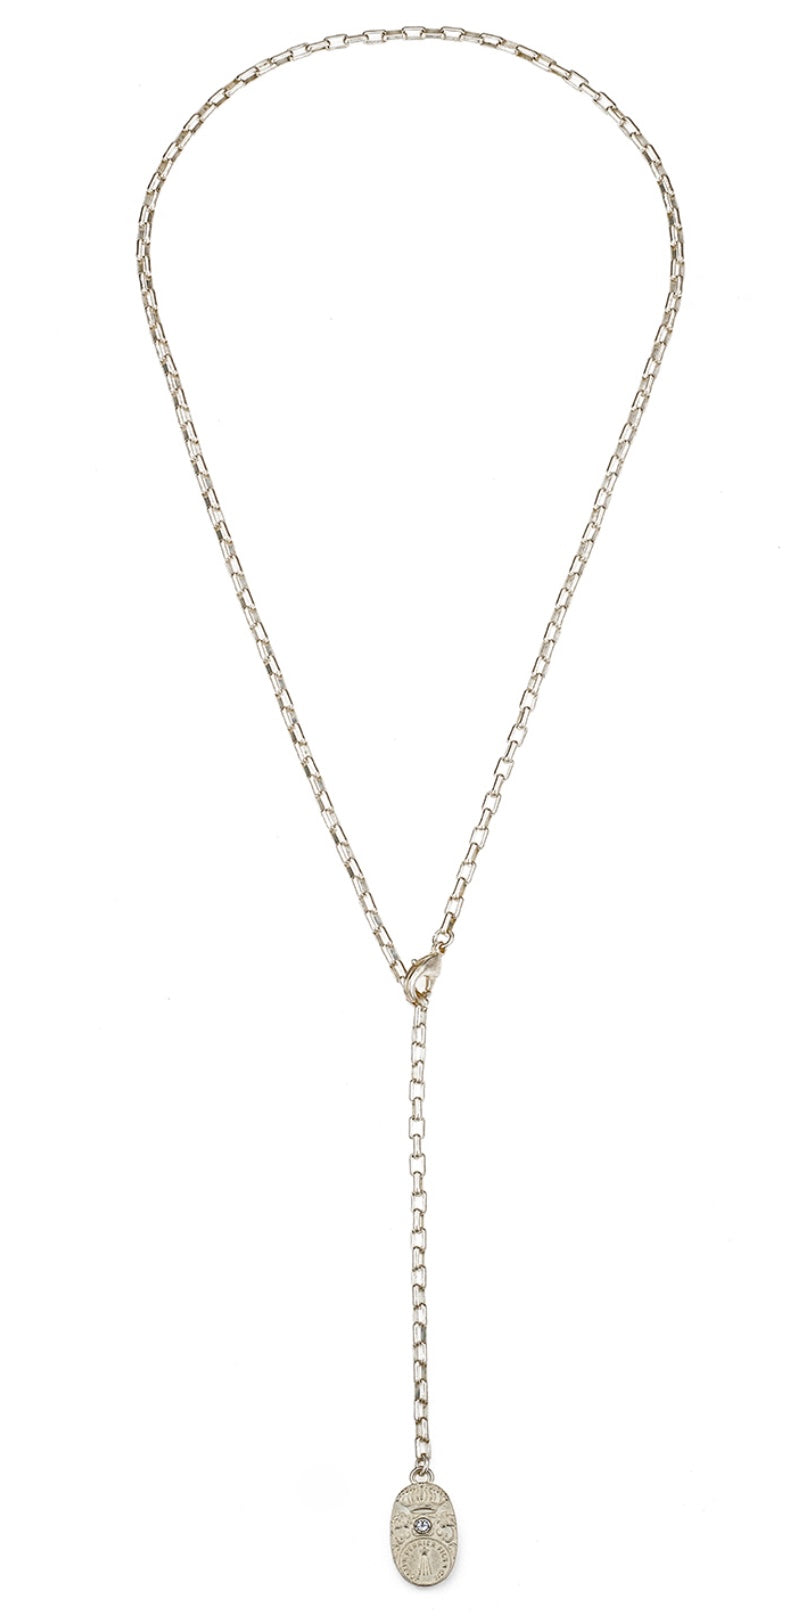 French Kande Loire Lariat Necklace Silver